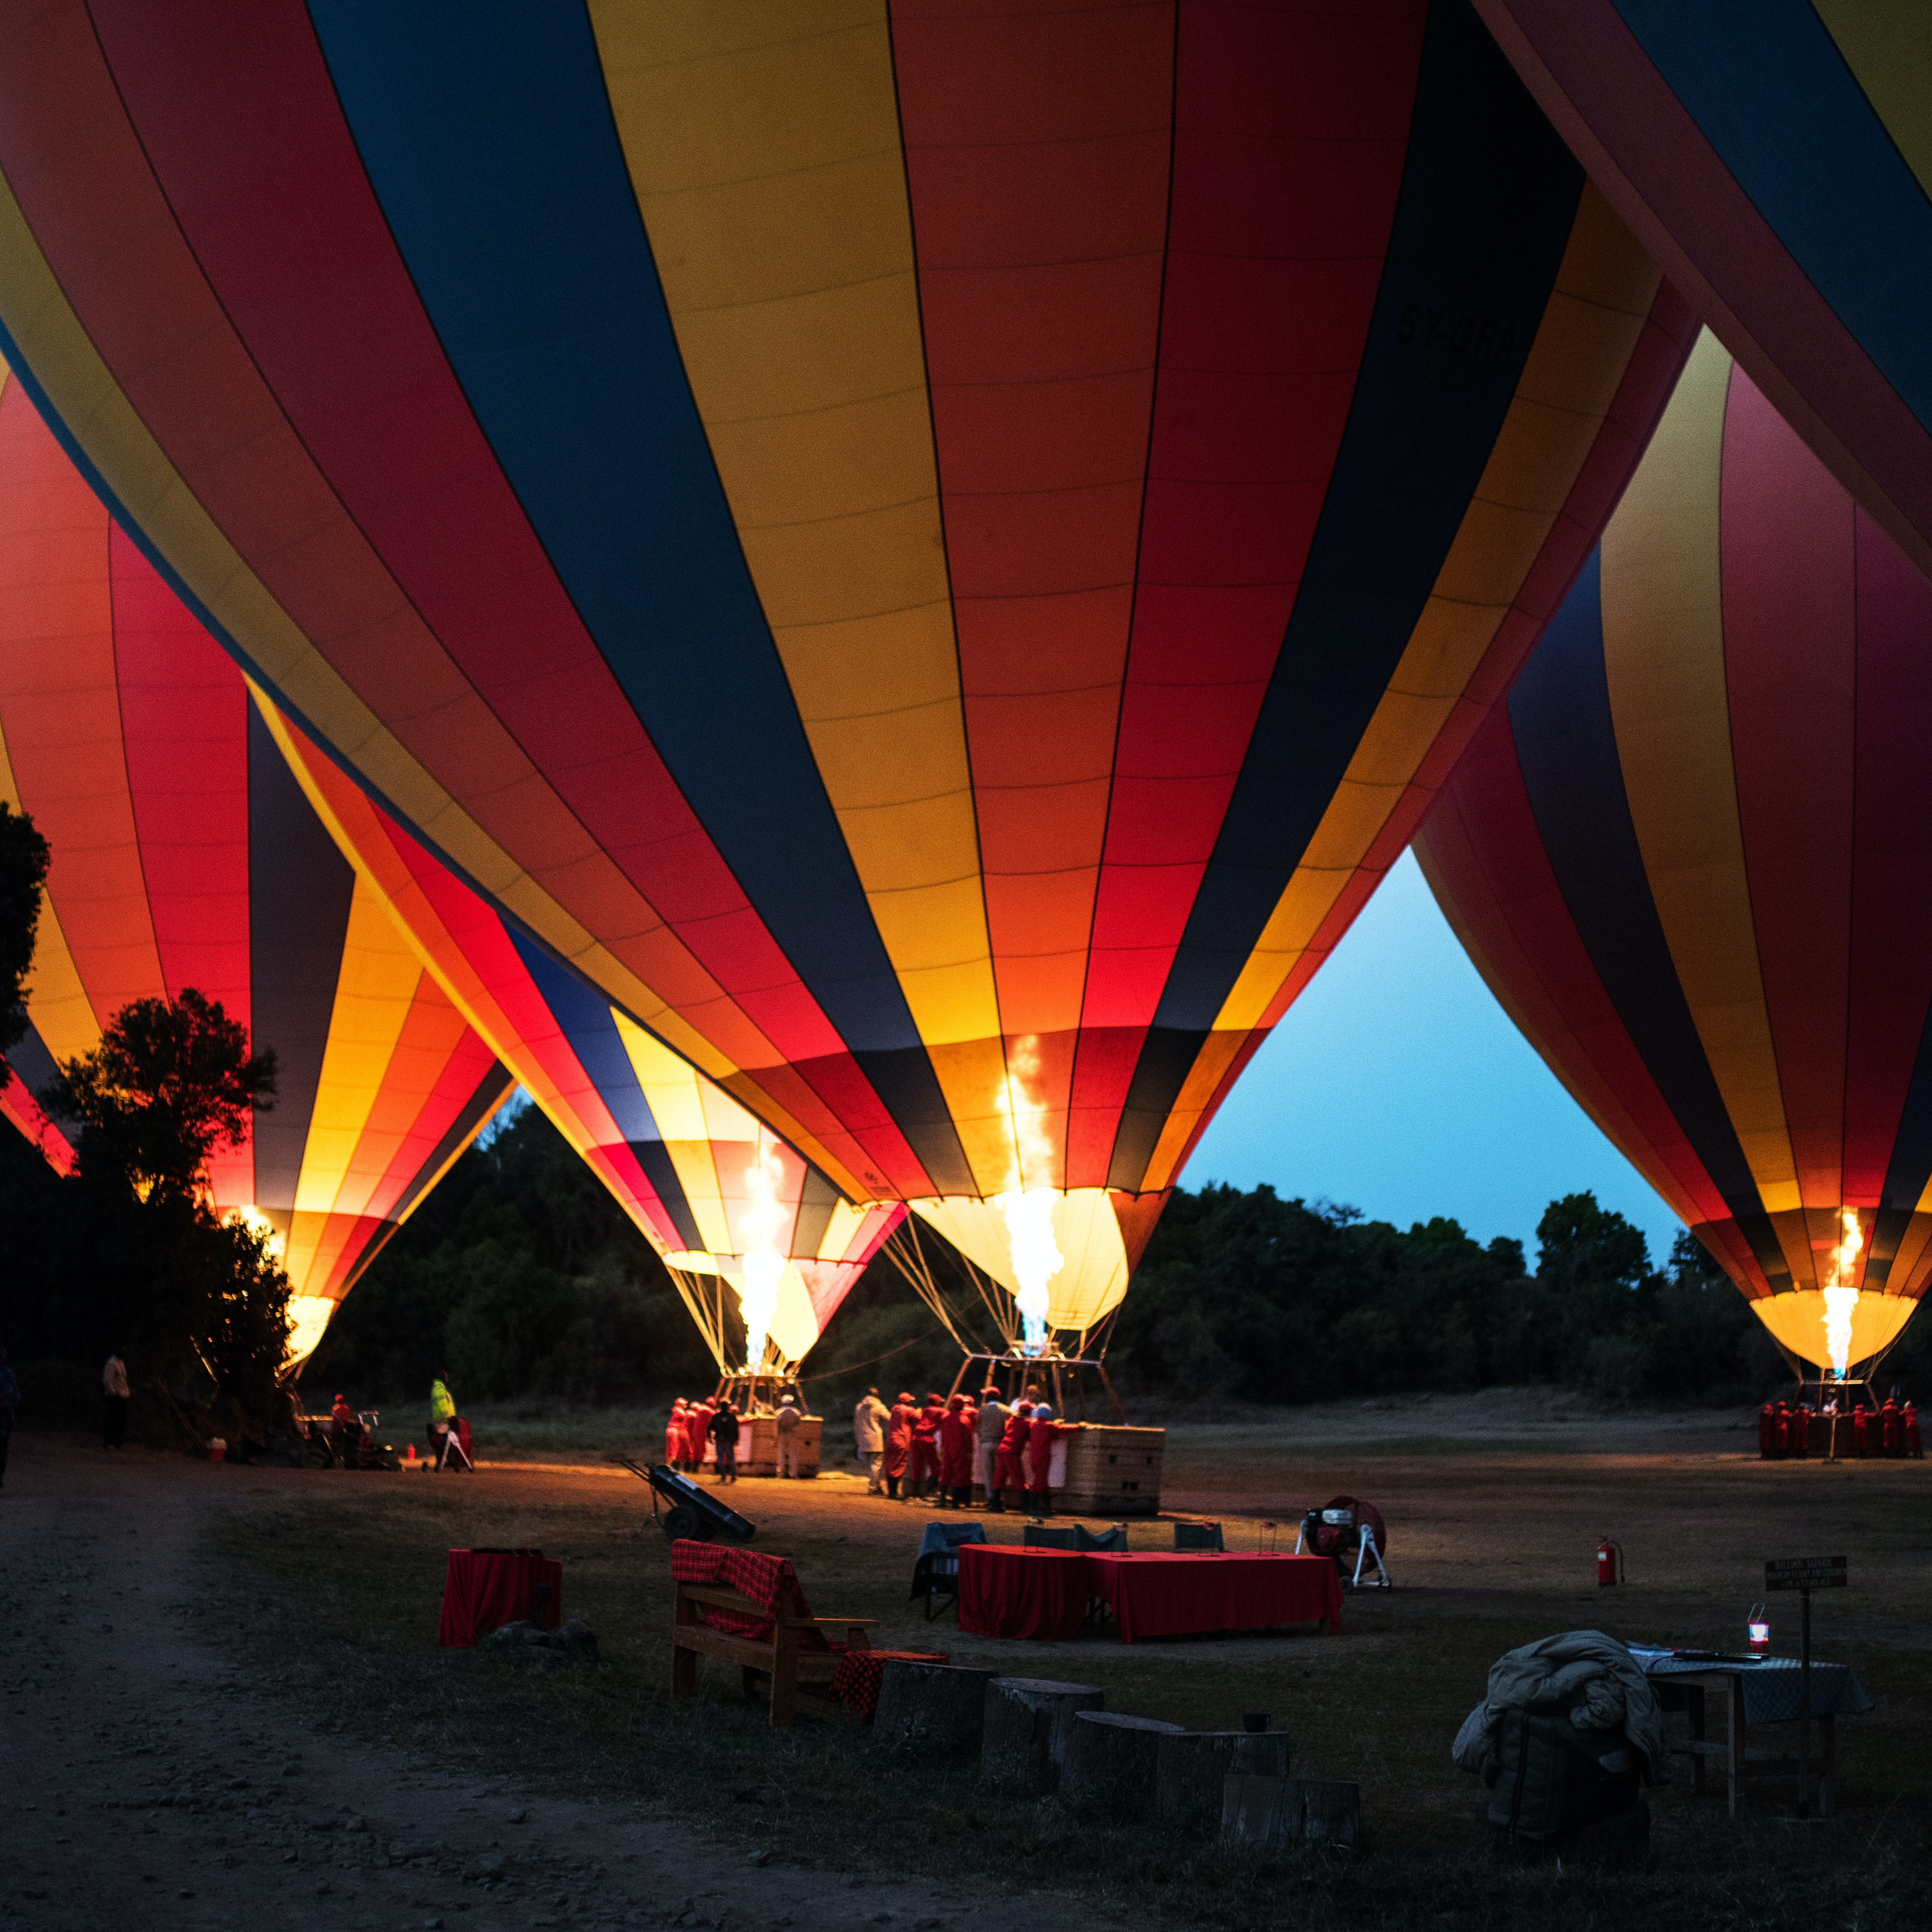 4 multicolored hot air balloons being lit at night